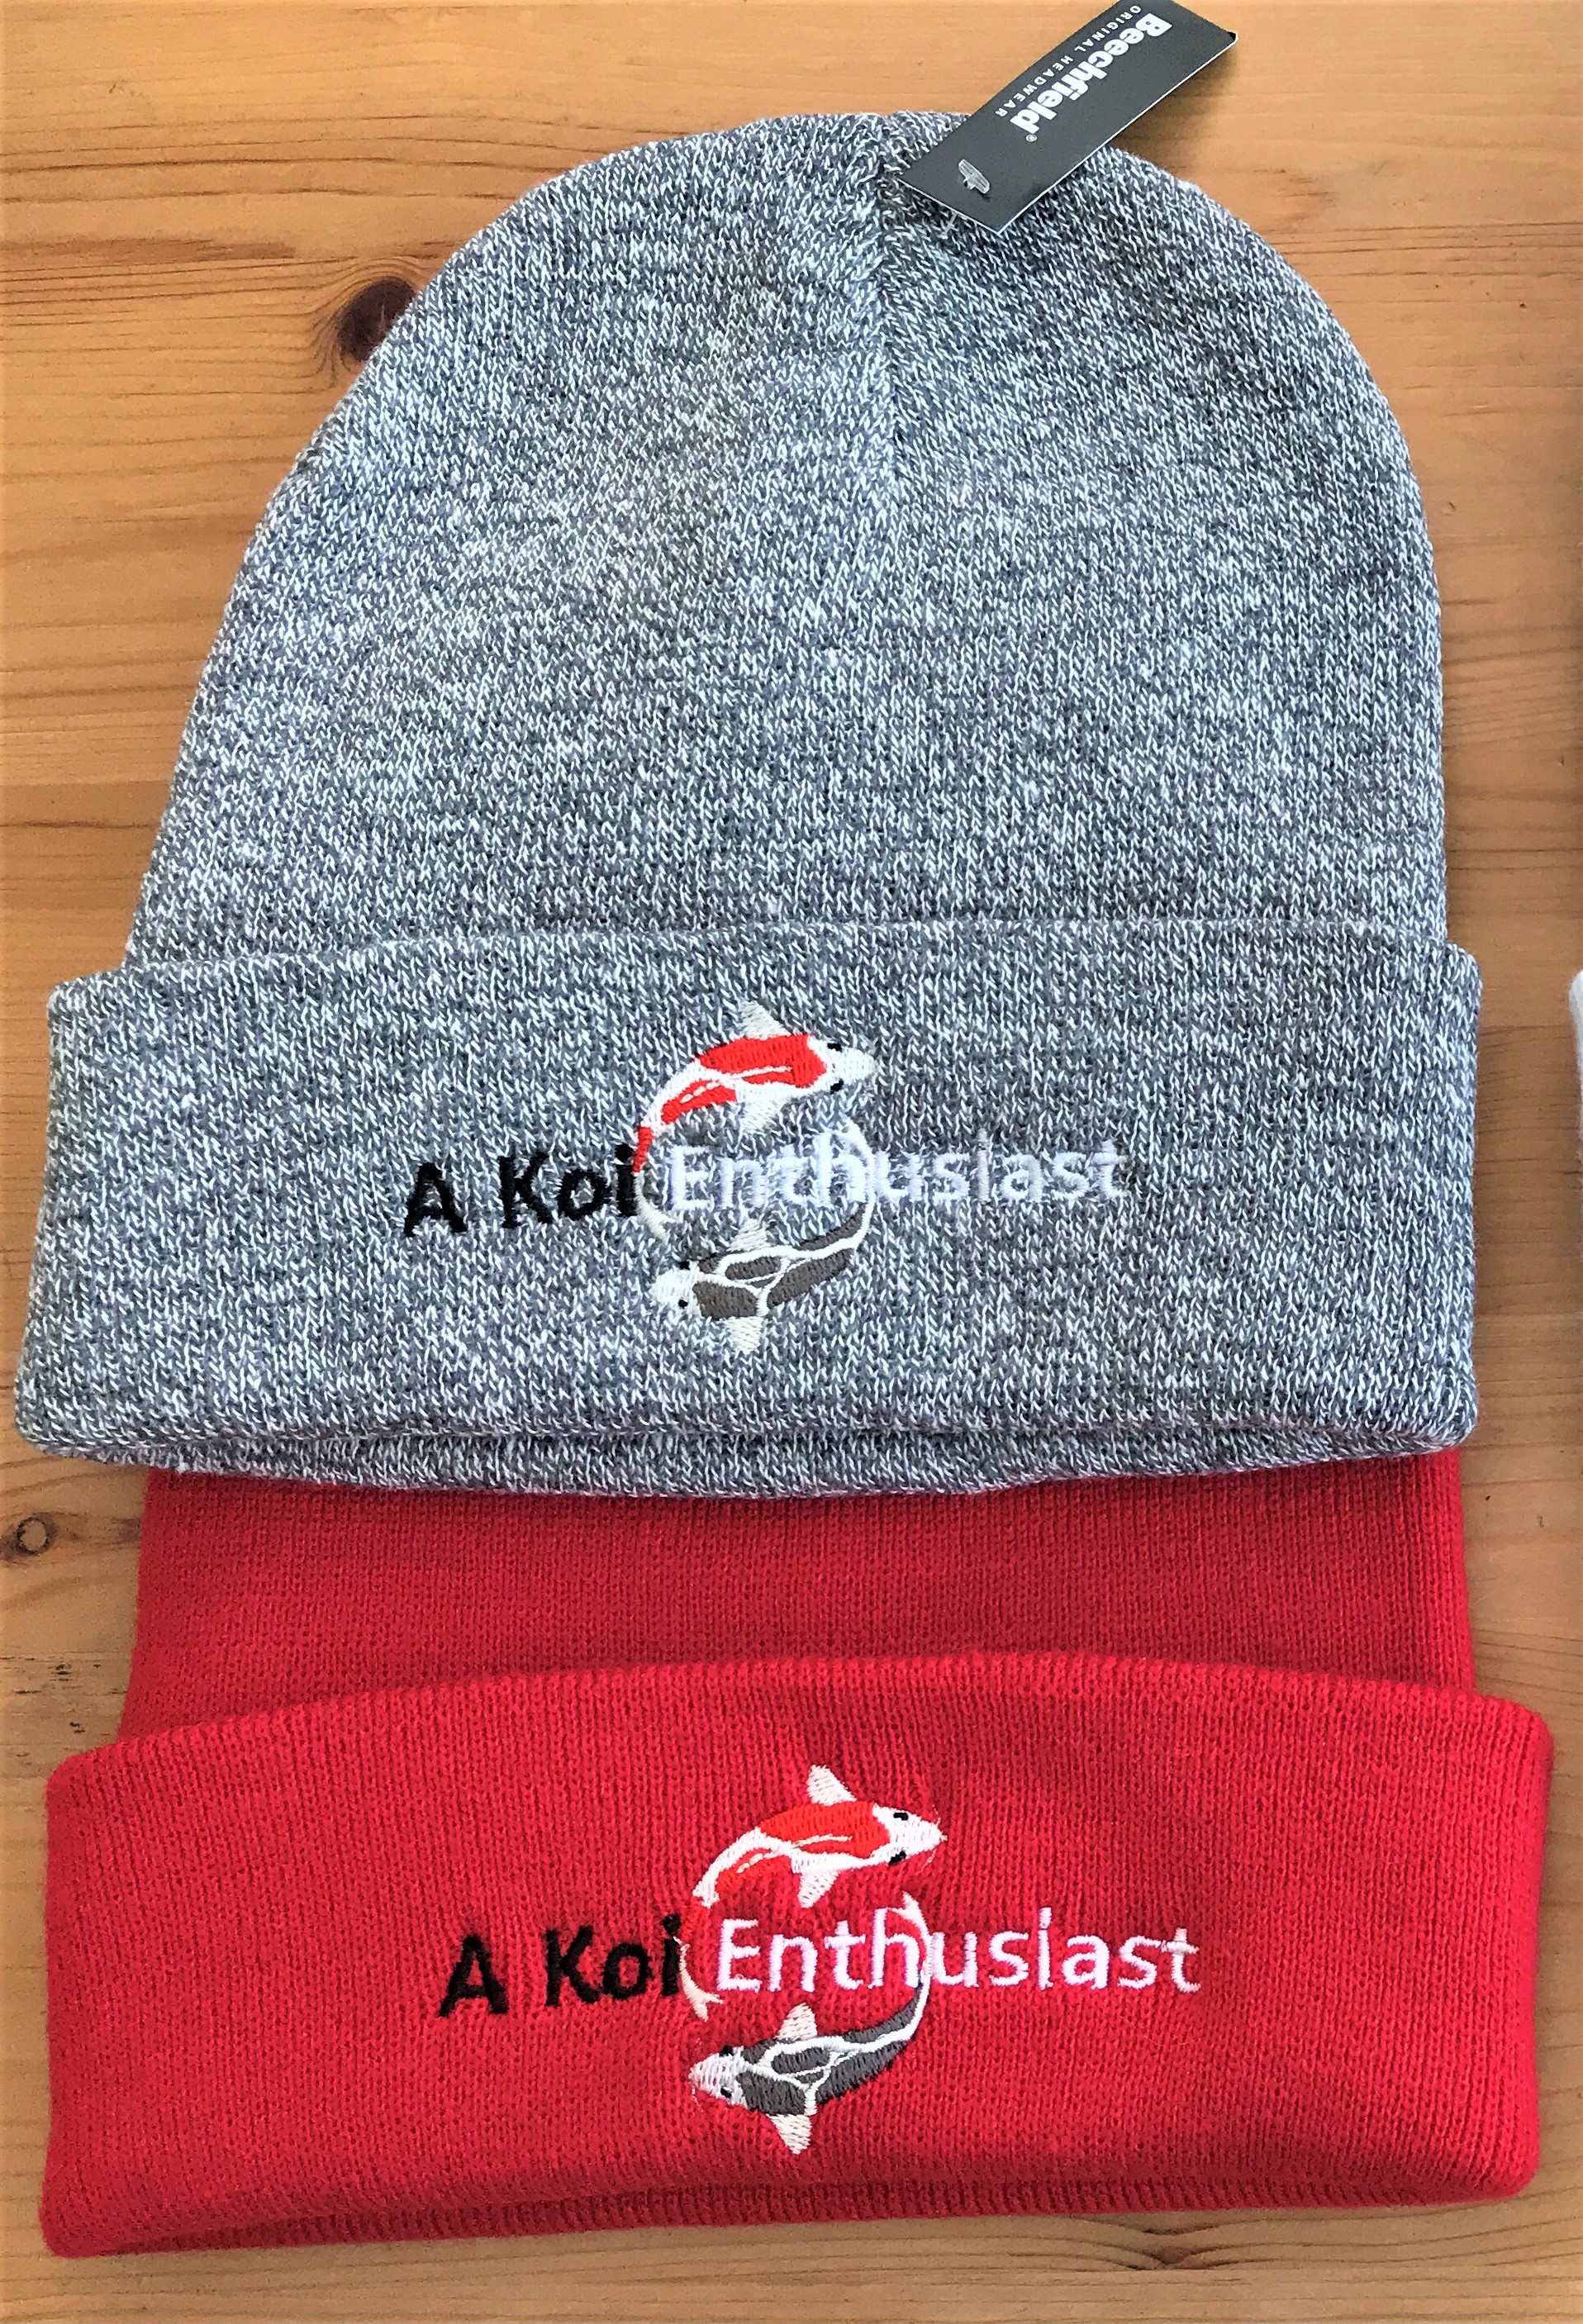 Heather Grey Classic "A Koi Enthusiast" Embroidered Beanie